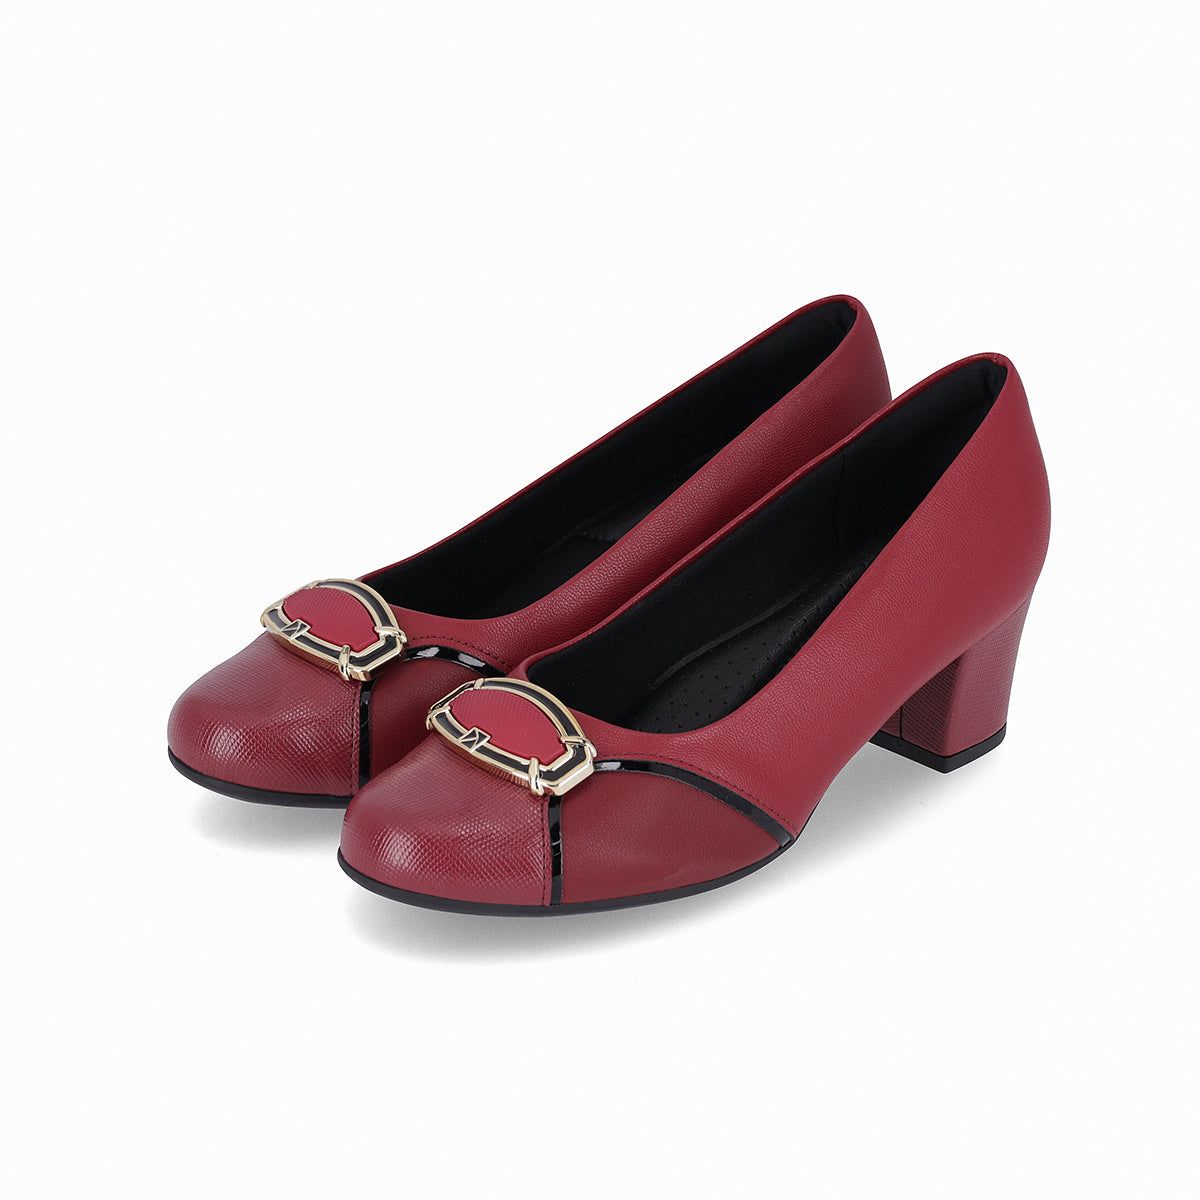 Zapato Mujer Piccadilly 110142